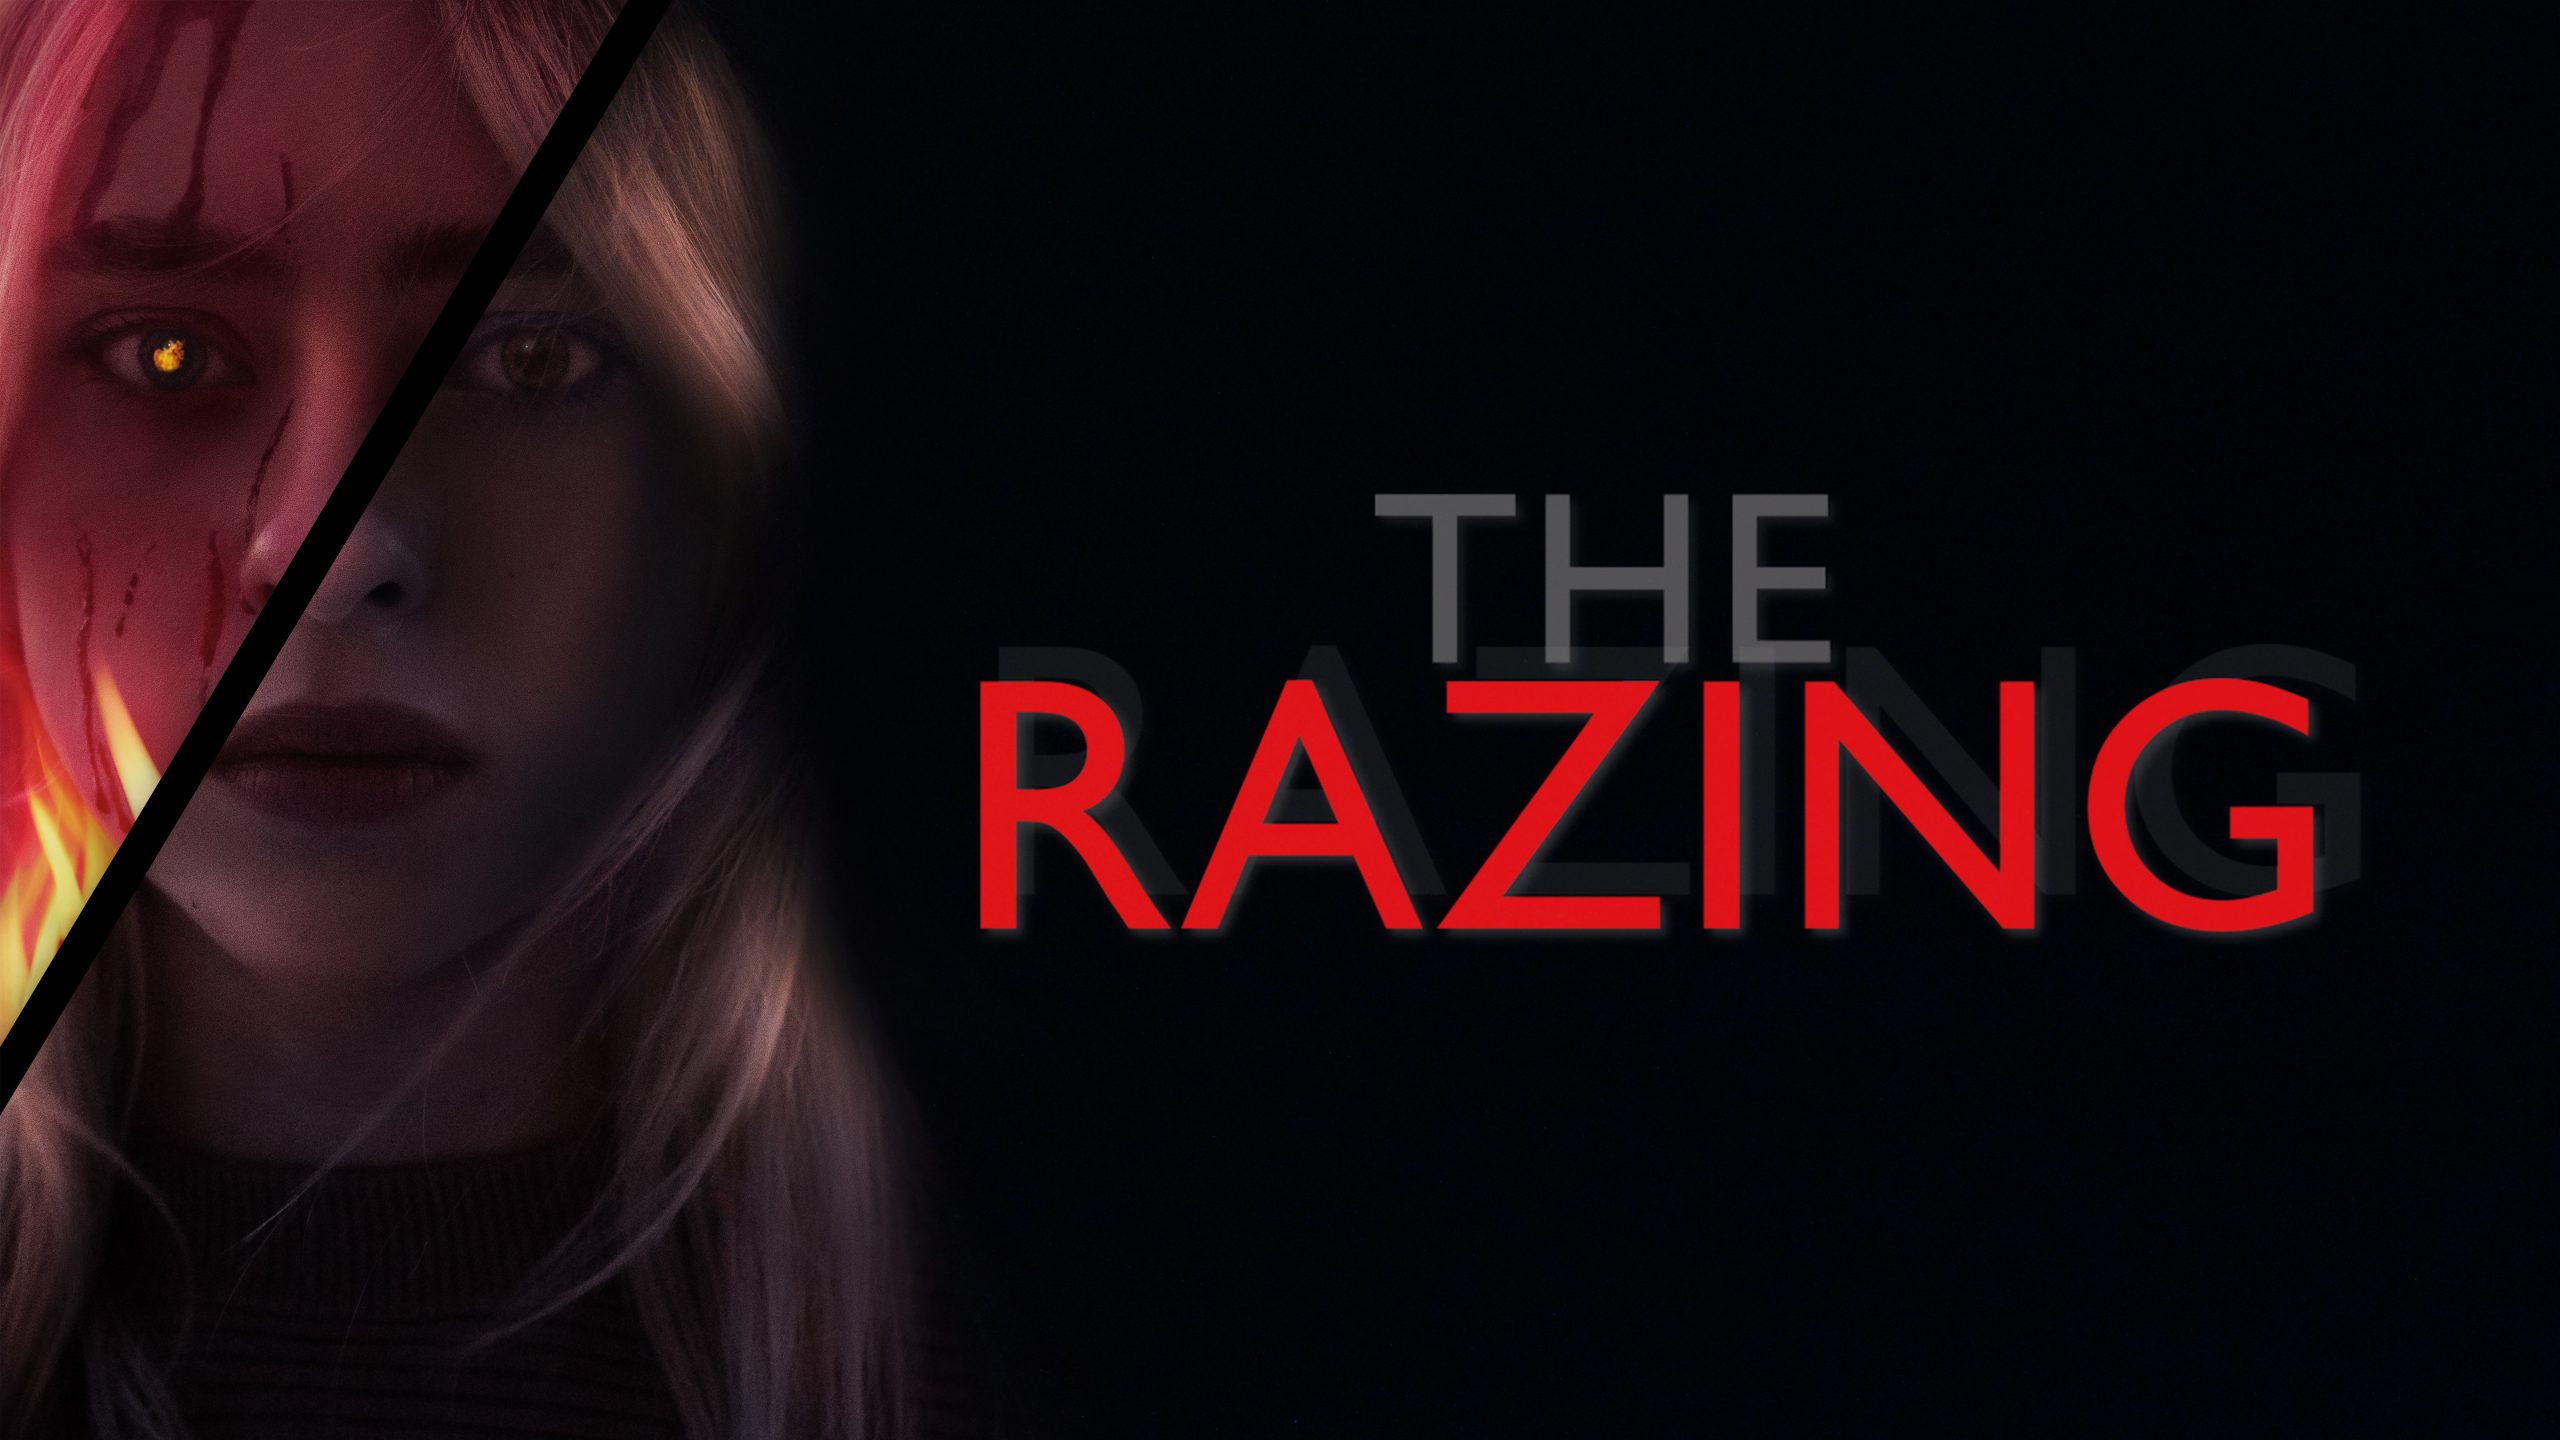 The movie poster for The Razing